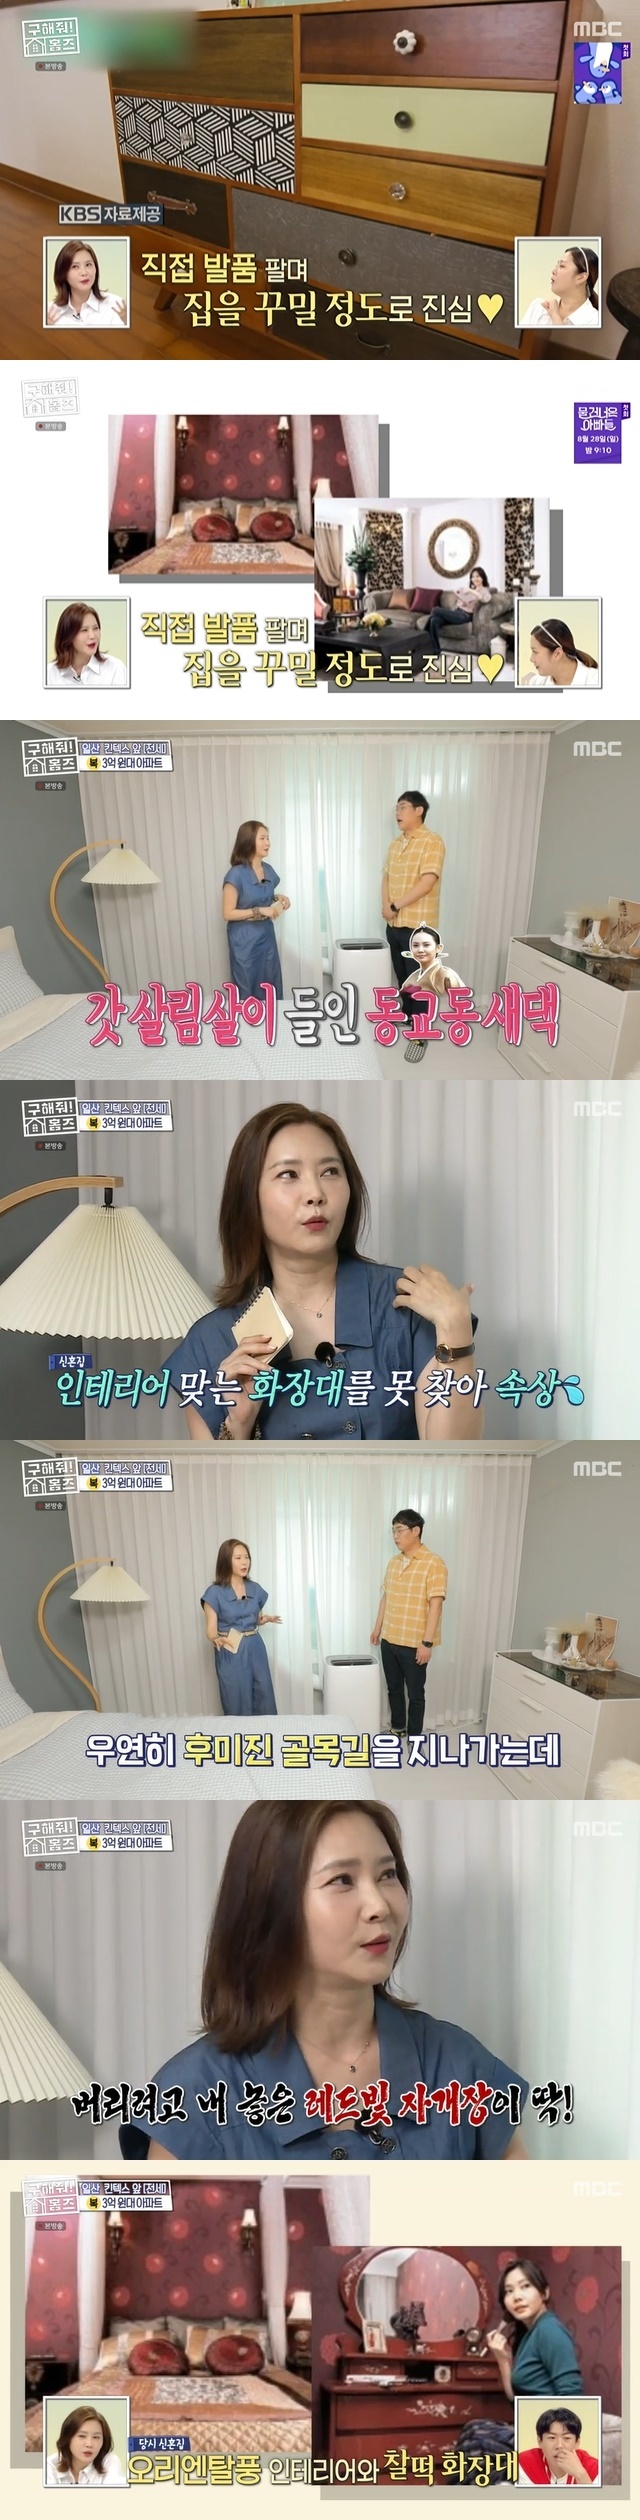 Chu Sang-mi has released a story about the house with a mother-in-law abandoned by others.In the 170th MBC entertainment Where is My Home (hereinafter referred to as Homes) broadcast on August 21, actor and movie star Chu Sang-mi appeared as a double team intern co-ordinator.On this day, Chu Sang-mi mentioned his house interiors before the full-scale confrontation.Chu Sang-mi said, When the oriental style was popular, I went to Itaewon and sold the furniture and collected all the furniture.However, Chu Sang-mi asked if he is still keeping it well these days, I grew up with a child, and the practical Northern Europe style improved.This room is Oriental, this room is Northern Europe Jung-gu heating. Chu Sang-mi asked Park Young-jin if he did not want to share the furniture, and he responded I can give it for free and excited all the coordinators.Chu Sang-mi, who is confident that he has a lot of experience in selling his products, said he has recently sold his own products.I moved from the same apartment to the next complex, said Chu Sang-mi, and there was a preaching romance as I walked on a landscaped good walk.The apartment that lives now has a good landscape and view, so I have been living with my child for more than 10 years. The town where Chu Sang-mi is so affectionate is Ilsan.Chu Sang-mi, who later sold his products to Goyang Ilsan West, said, I know I am an Ilsan resident, but this is the best infrastructure in Ilsan.Chu Sang-mi looked around the house and said, I was in Donggyo-dong with an episode, (the past) Honeymoon home, and I wanted to give an impact to the dresser, but I did not like it.There was a red mother-in-law that someone had put away in the alley that was walking on the street. He brought this red mother-in-law and did the house interiors.Cody, including Park Na-rae, was surprised by Chu Sang-mis sense when photos of the house were released.Chu Sang-mi trembled to find Baekseok-dong, East of Ilsan, saying, This is my navari.Chu Sang-mi said, This is a very good surrounding infrastructure. Especially, I have a nearby shopping center and explained, This is where I have a movie theater and a food court every time.On the other hand, Chu Sang-mi shouted his opposition through his experience when the 1.5-room officetel sale was introduced by the opposing team Duck Team.Chu Sang-mi said: Ive been selling my boot since I got Honeymoon home; if I get married in a month, I dont care if theres no room.(But) the most fighting time is honeymoon, so each room is essential (1.5 rooms) too short of room, he actively appealed.